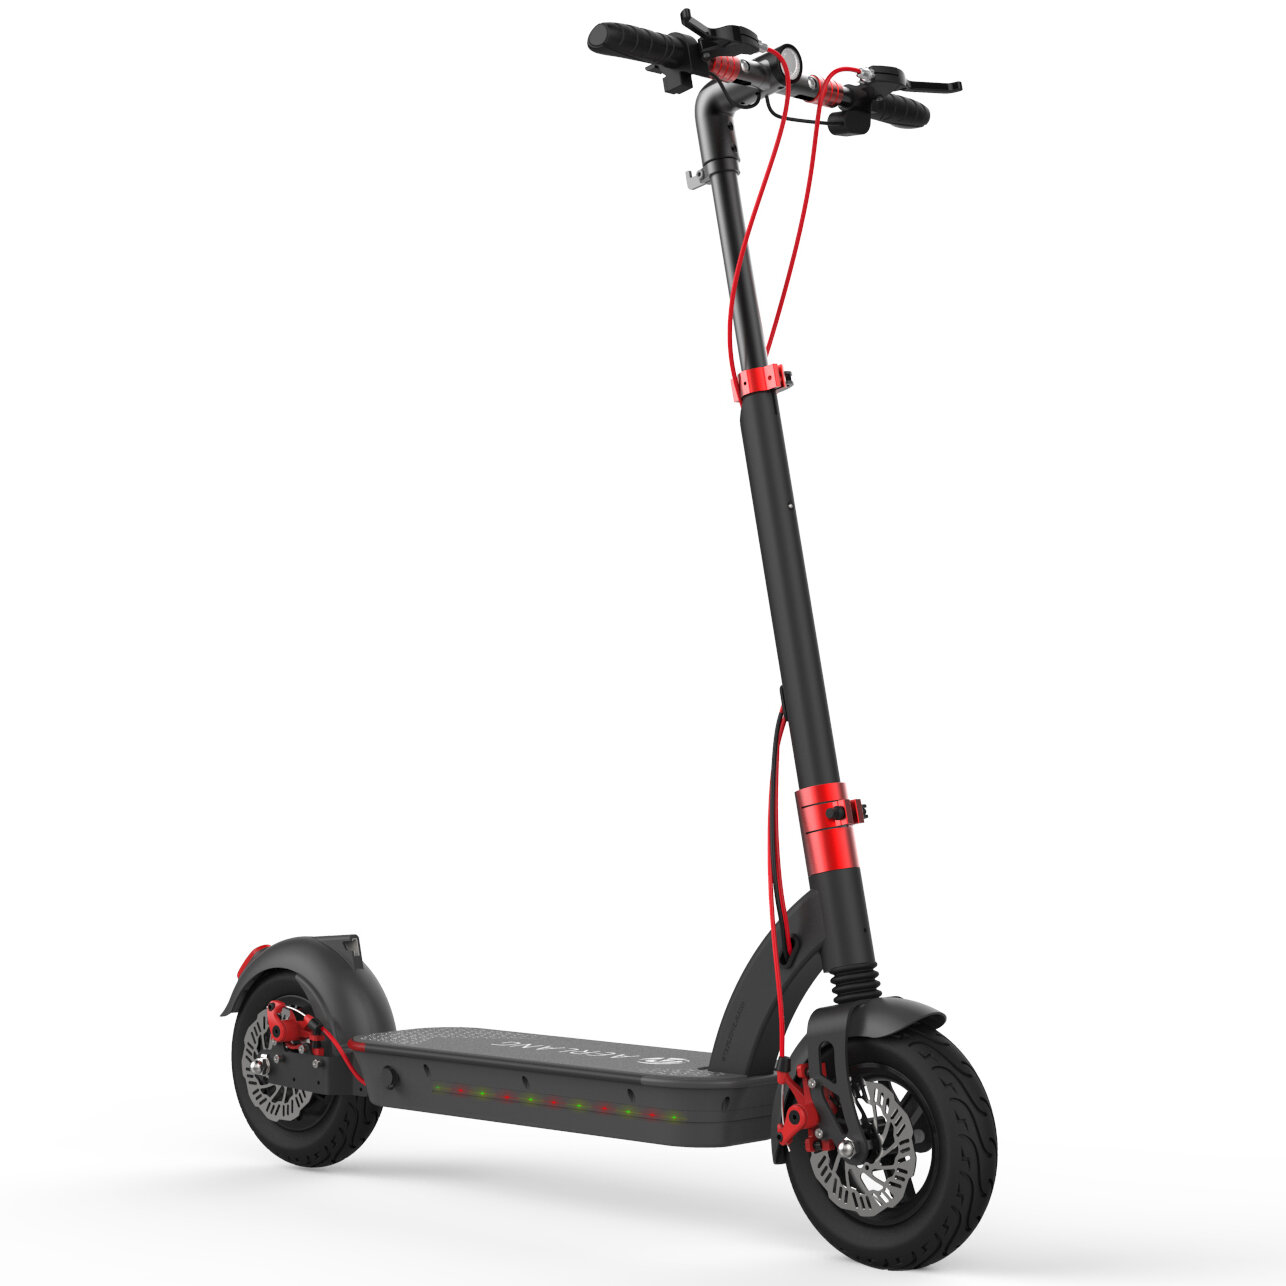 Aerlang H6 V2 500W 48V 17.5A Folding Electric Scooter 10inch 40km/h Top Speed 50-60km Mileage Range Max. Load 120kg Two Wheels Electric Scooter